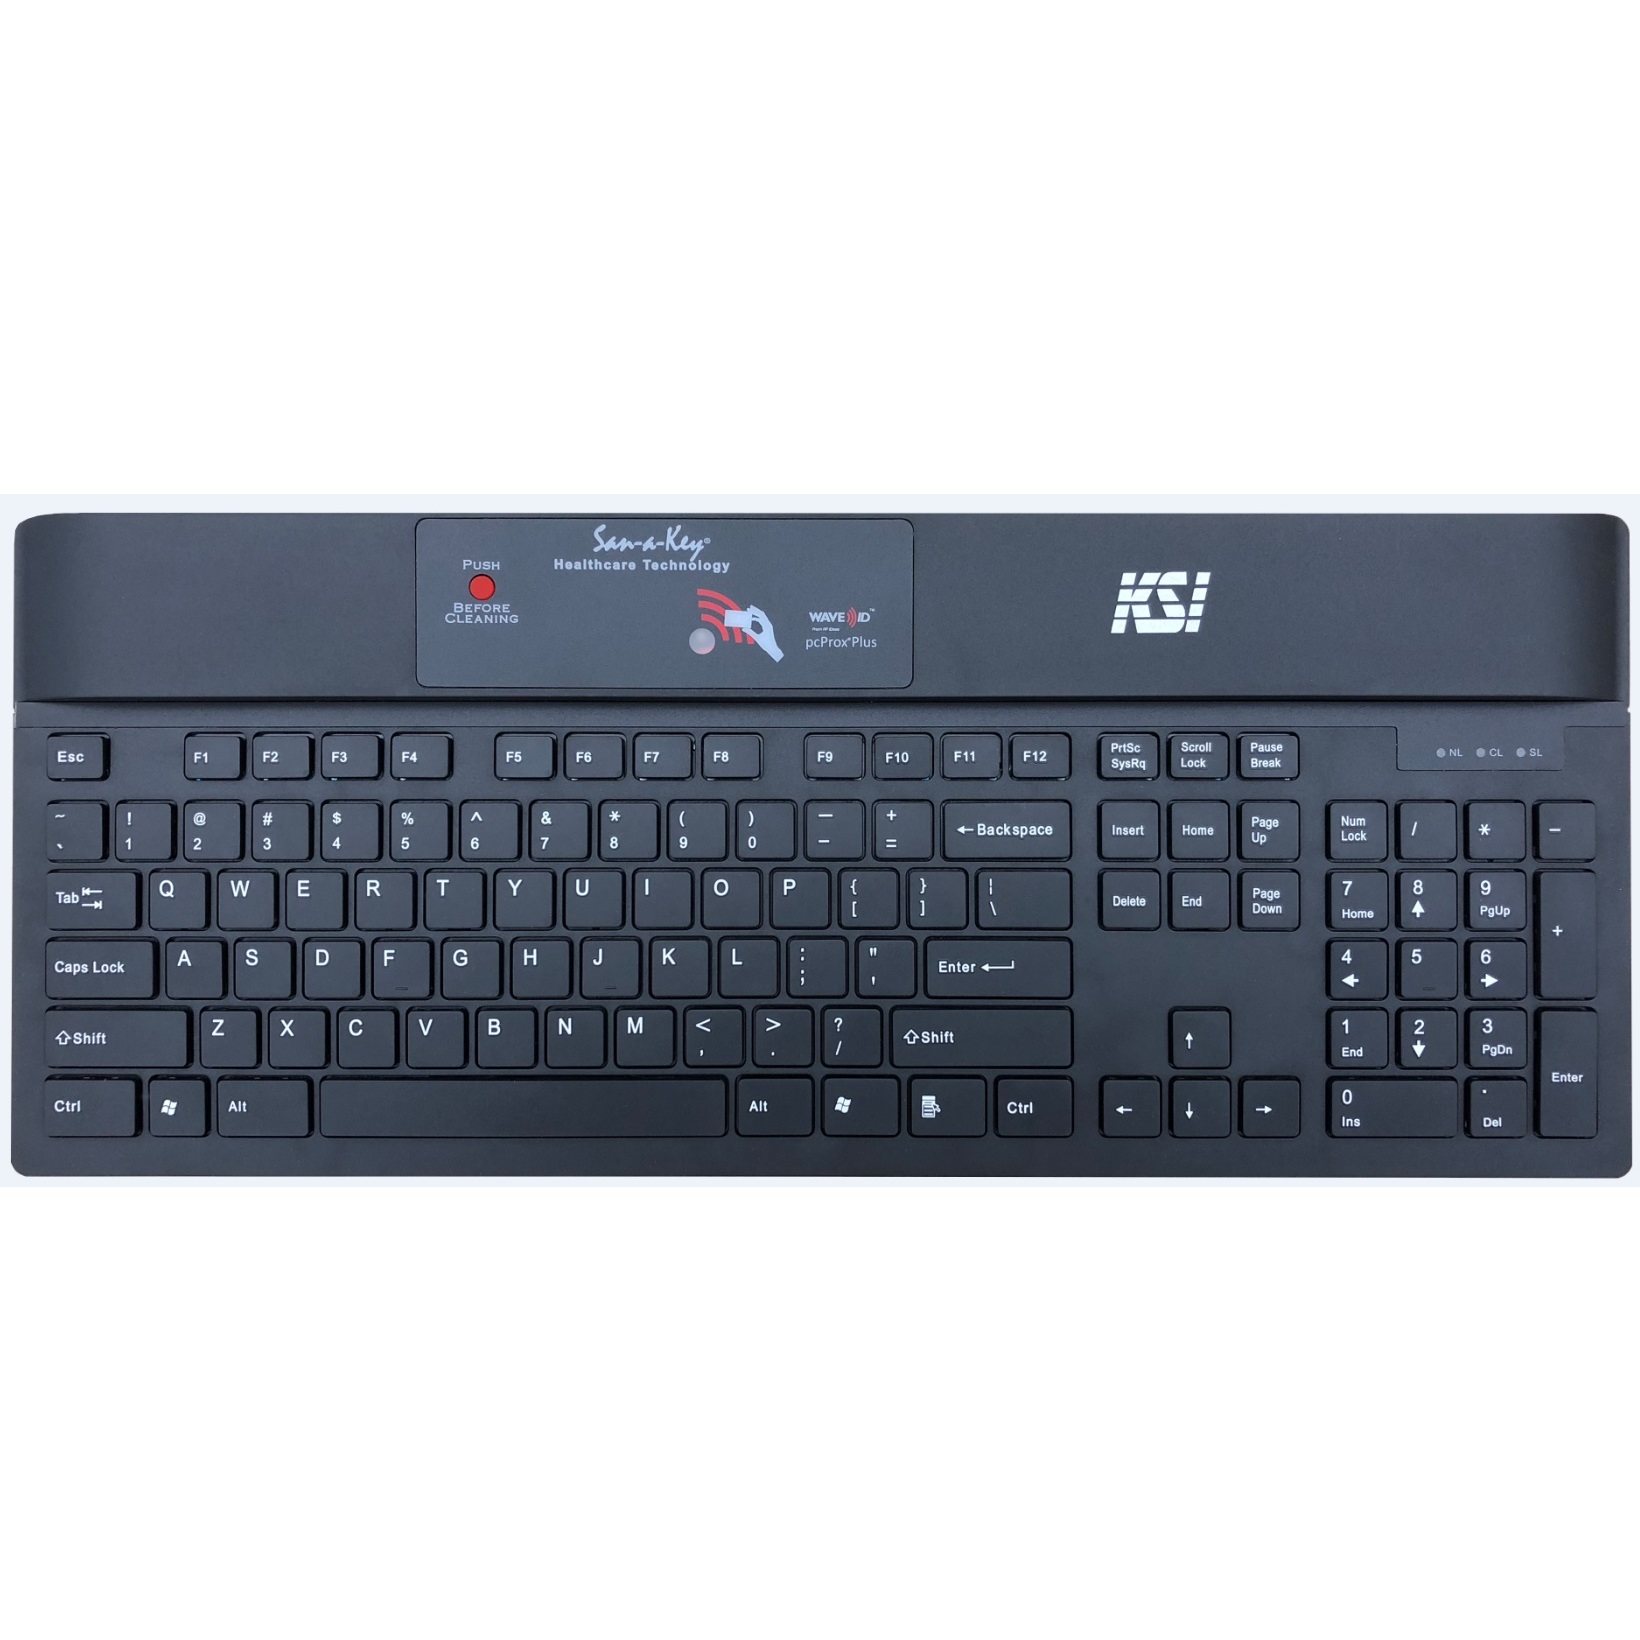 View KSI 1700 Disinfect-able Keyboard with Contactless RFIDeas 80582 Dual Band Card Reader USB